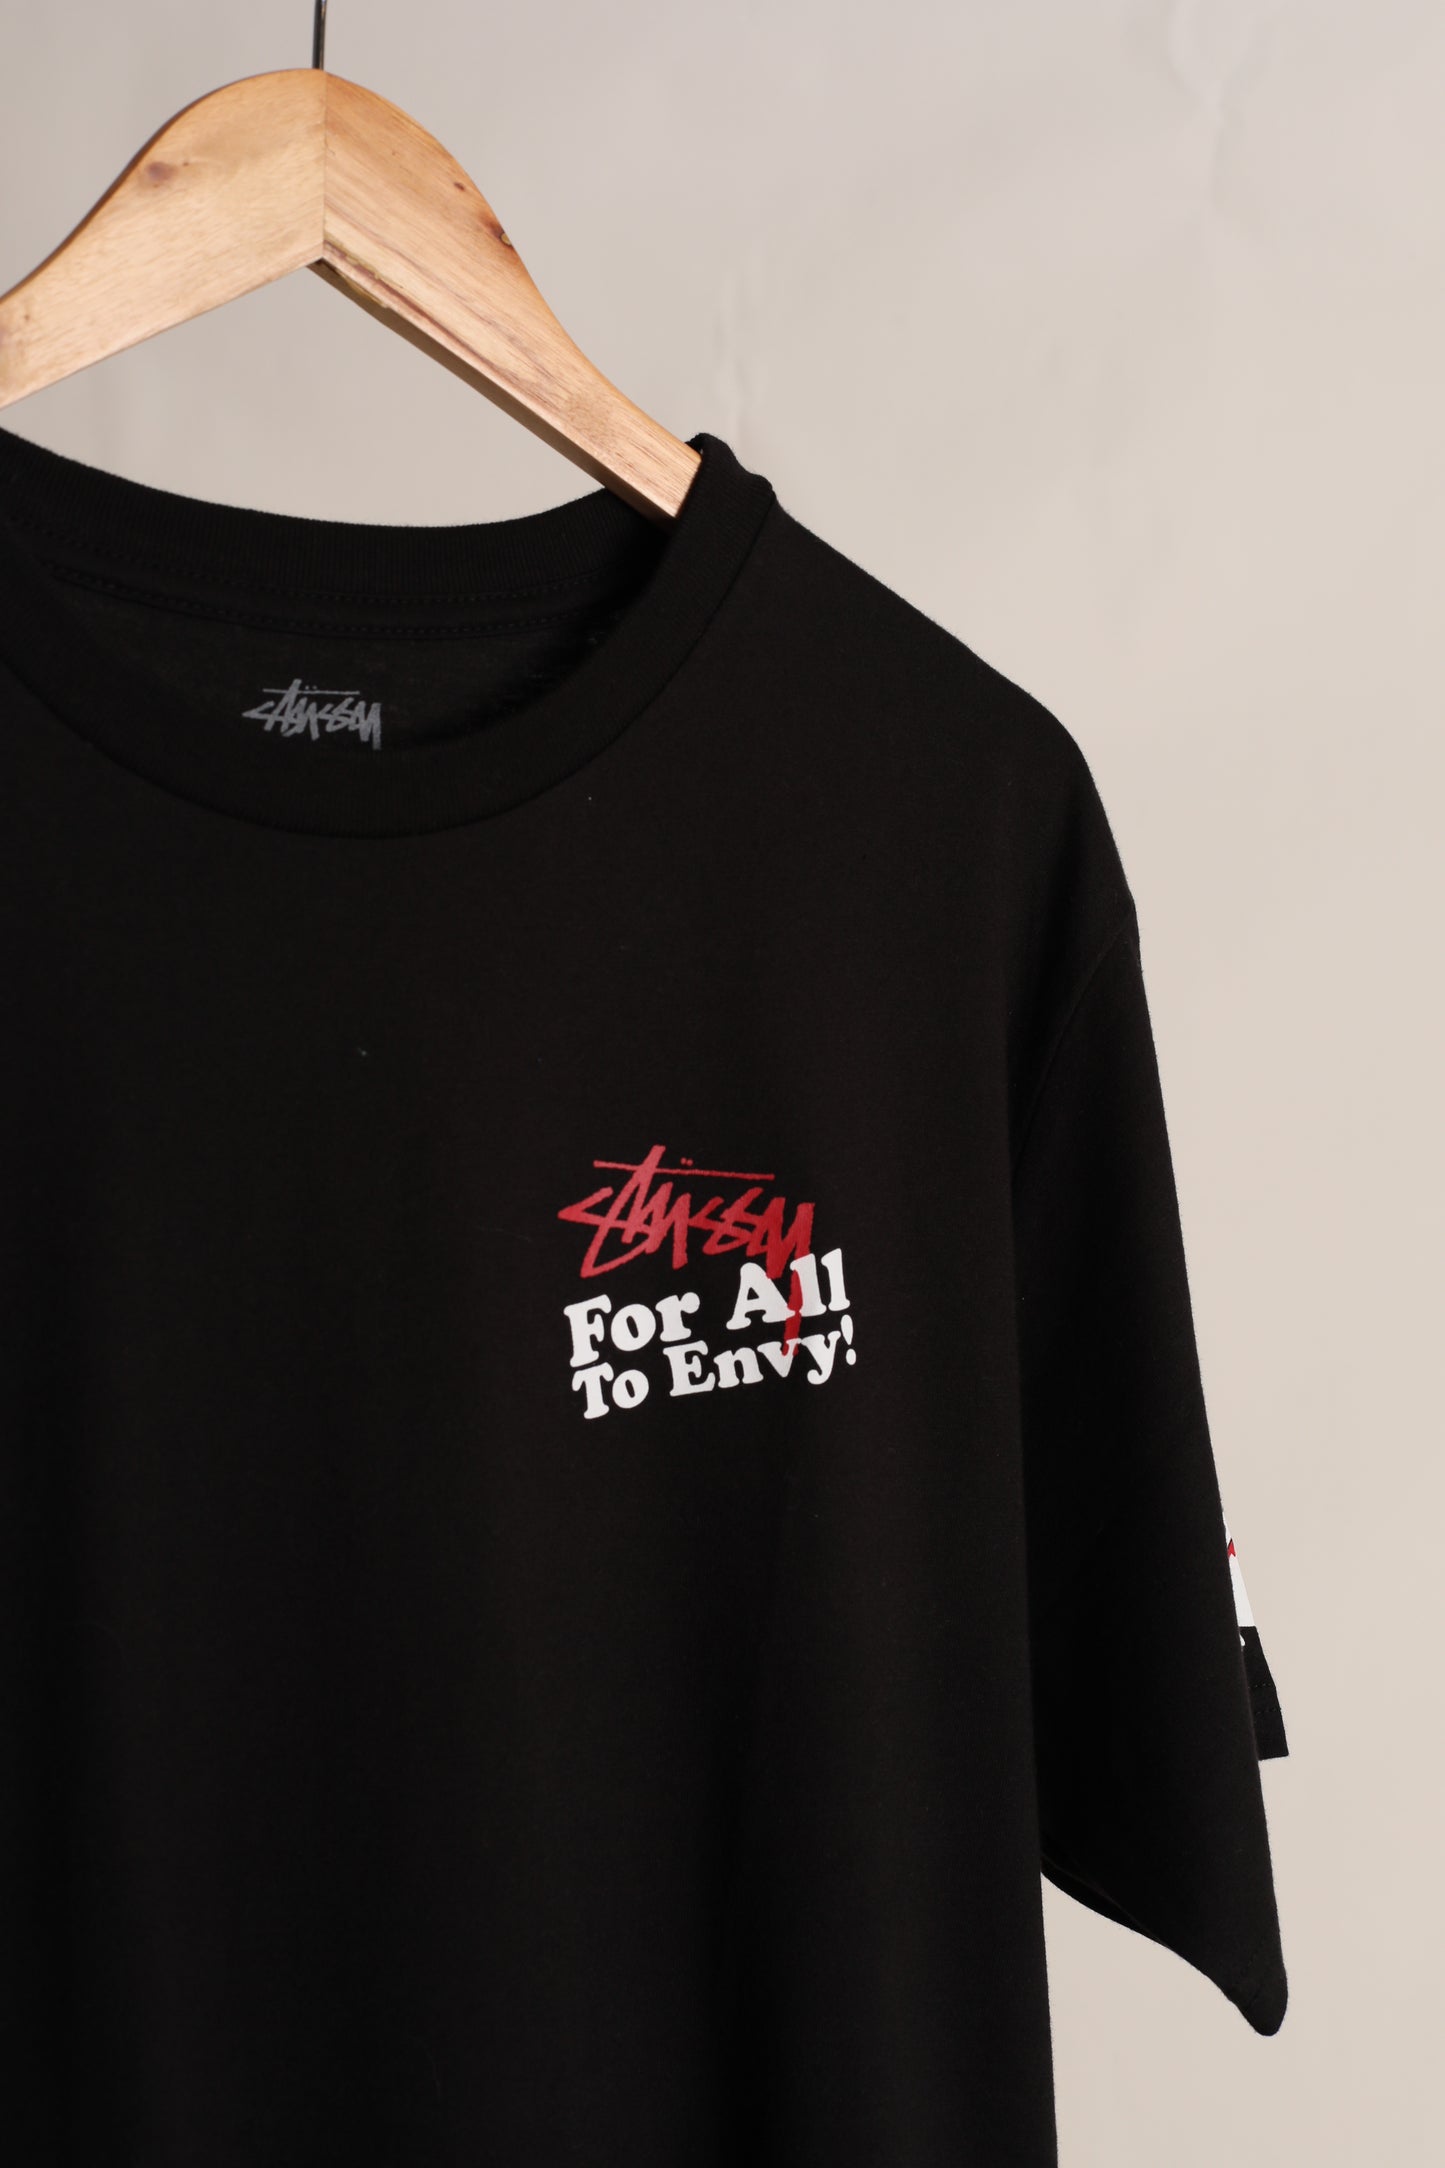 Deadstock Stussy All to Envy tee (L)